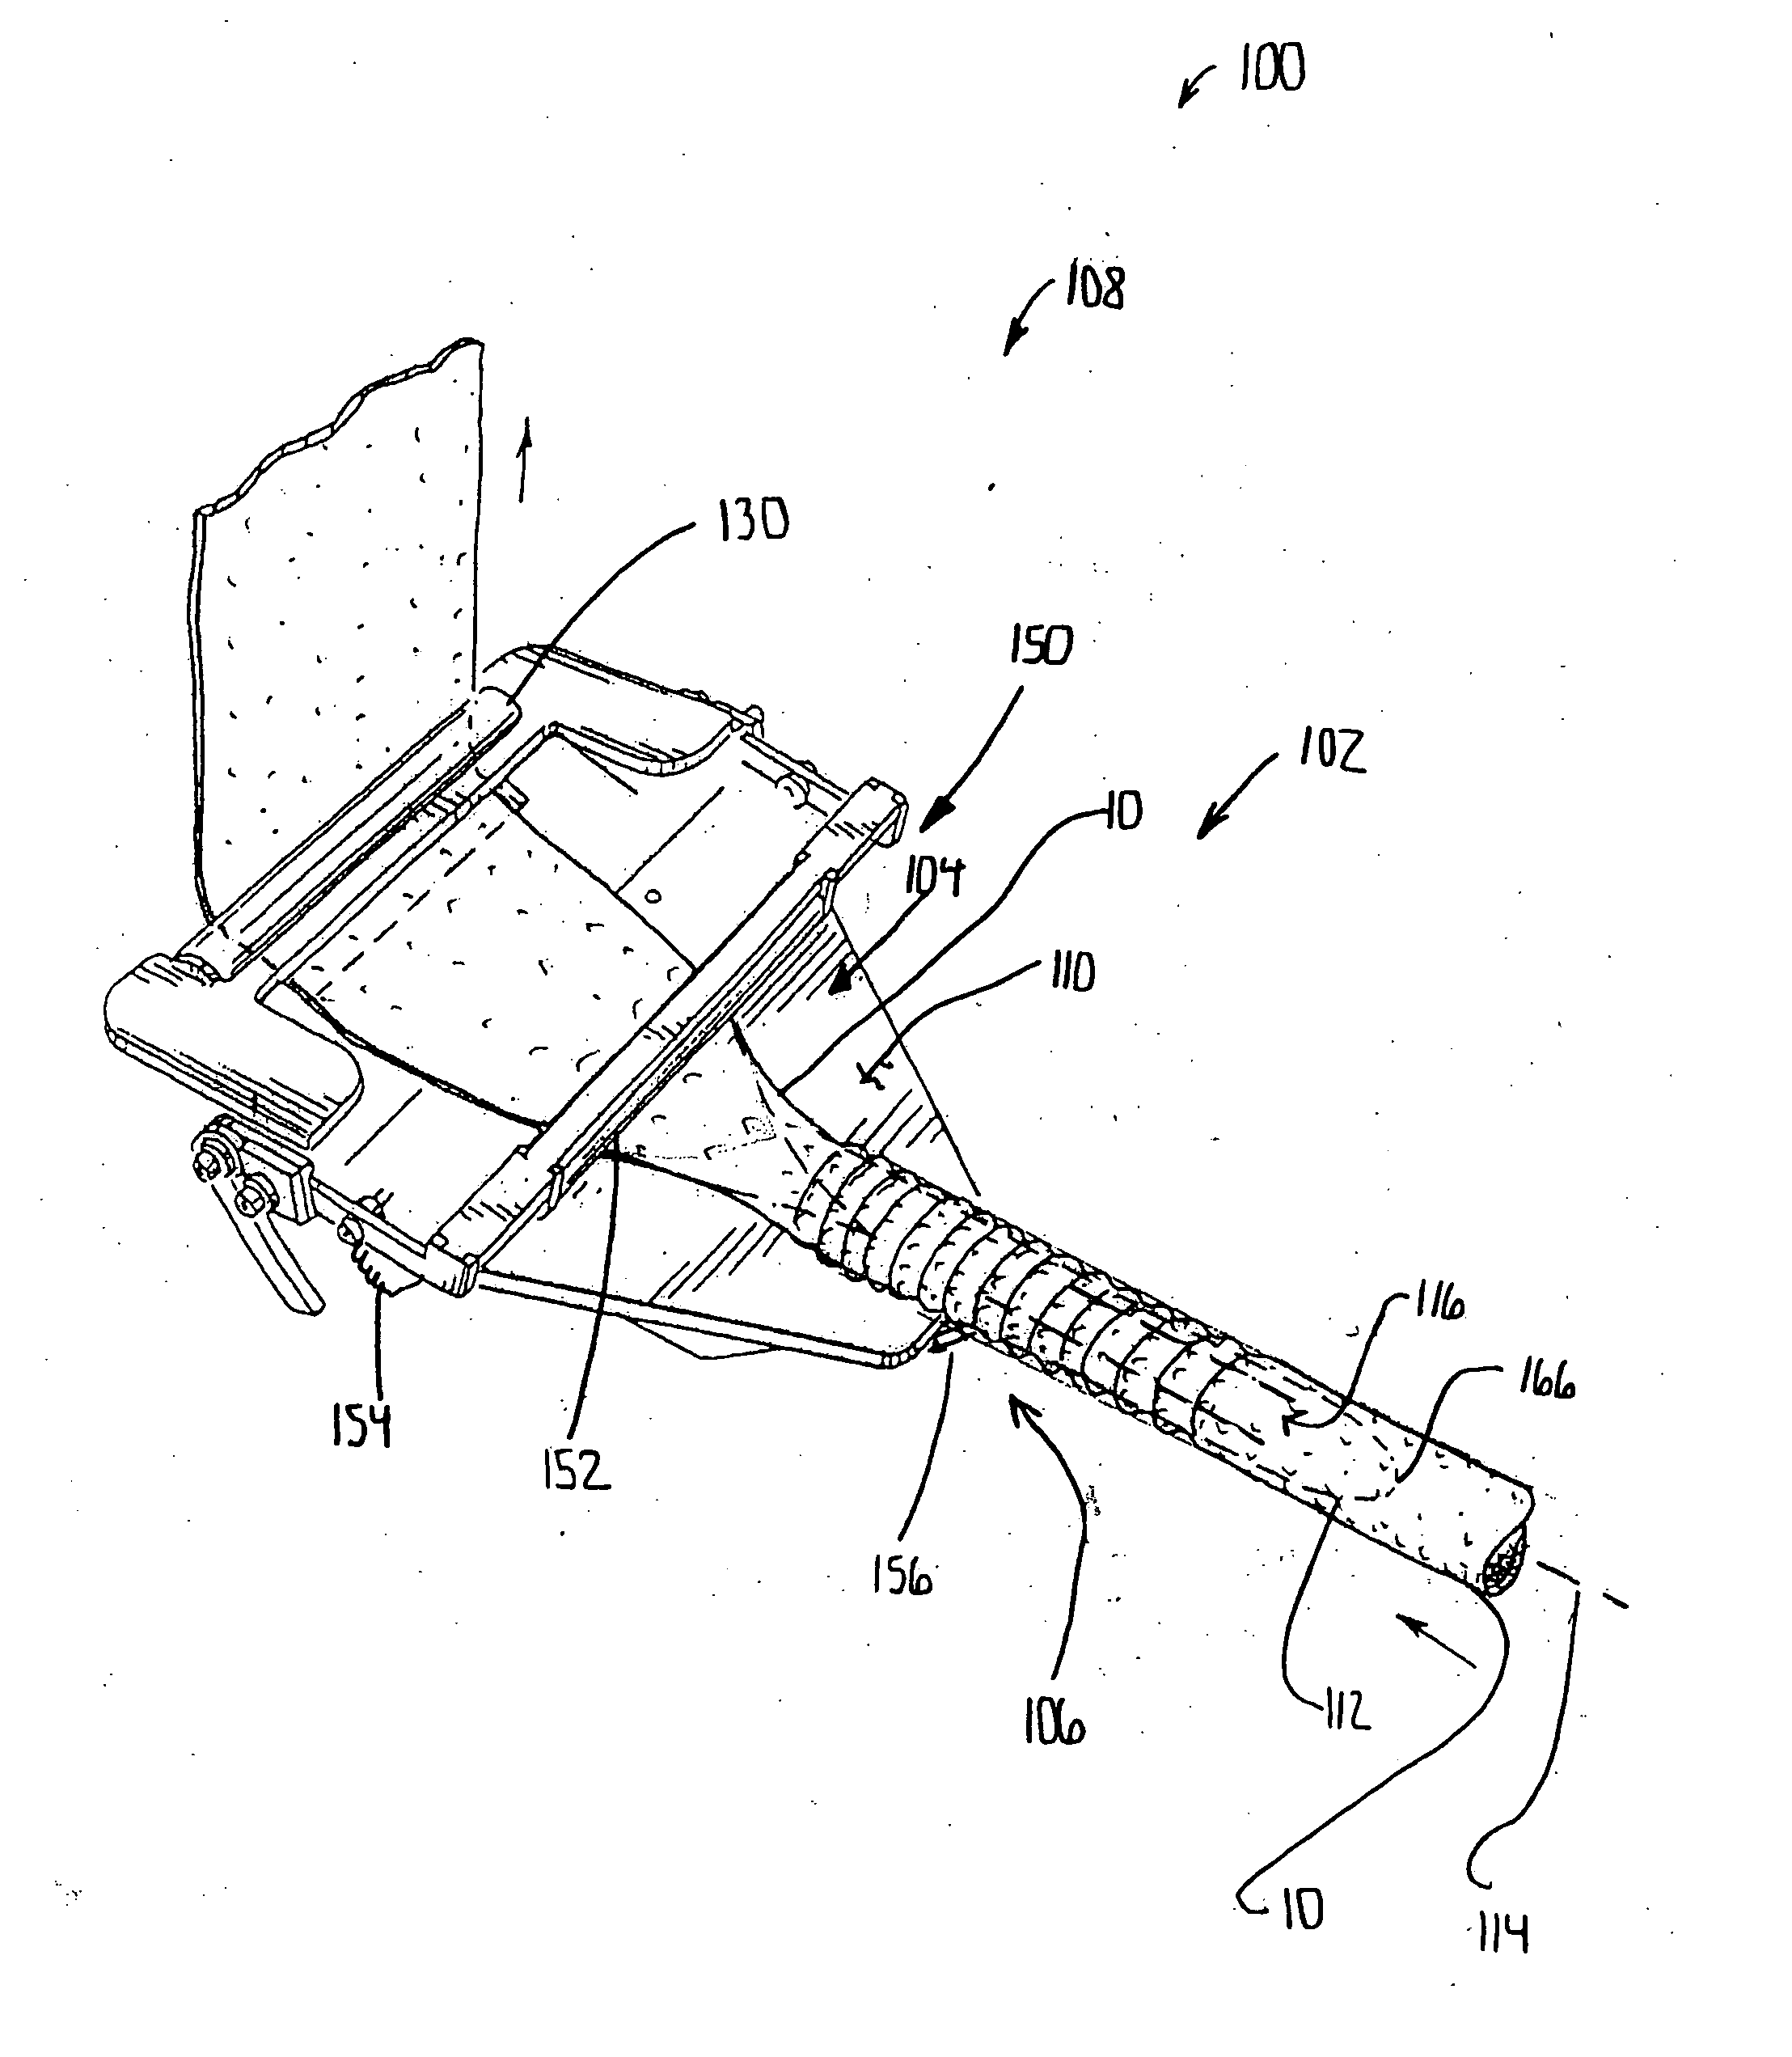 Intestine processing device and associated method